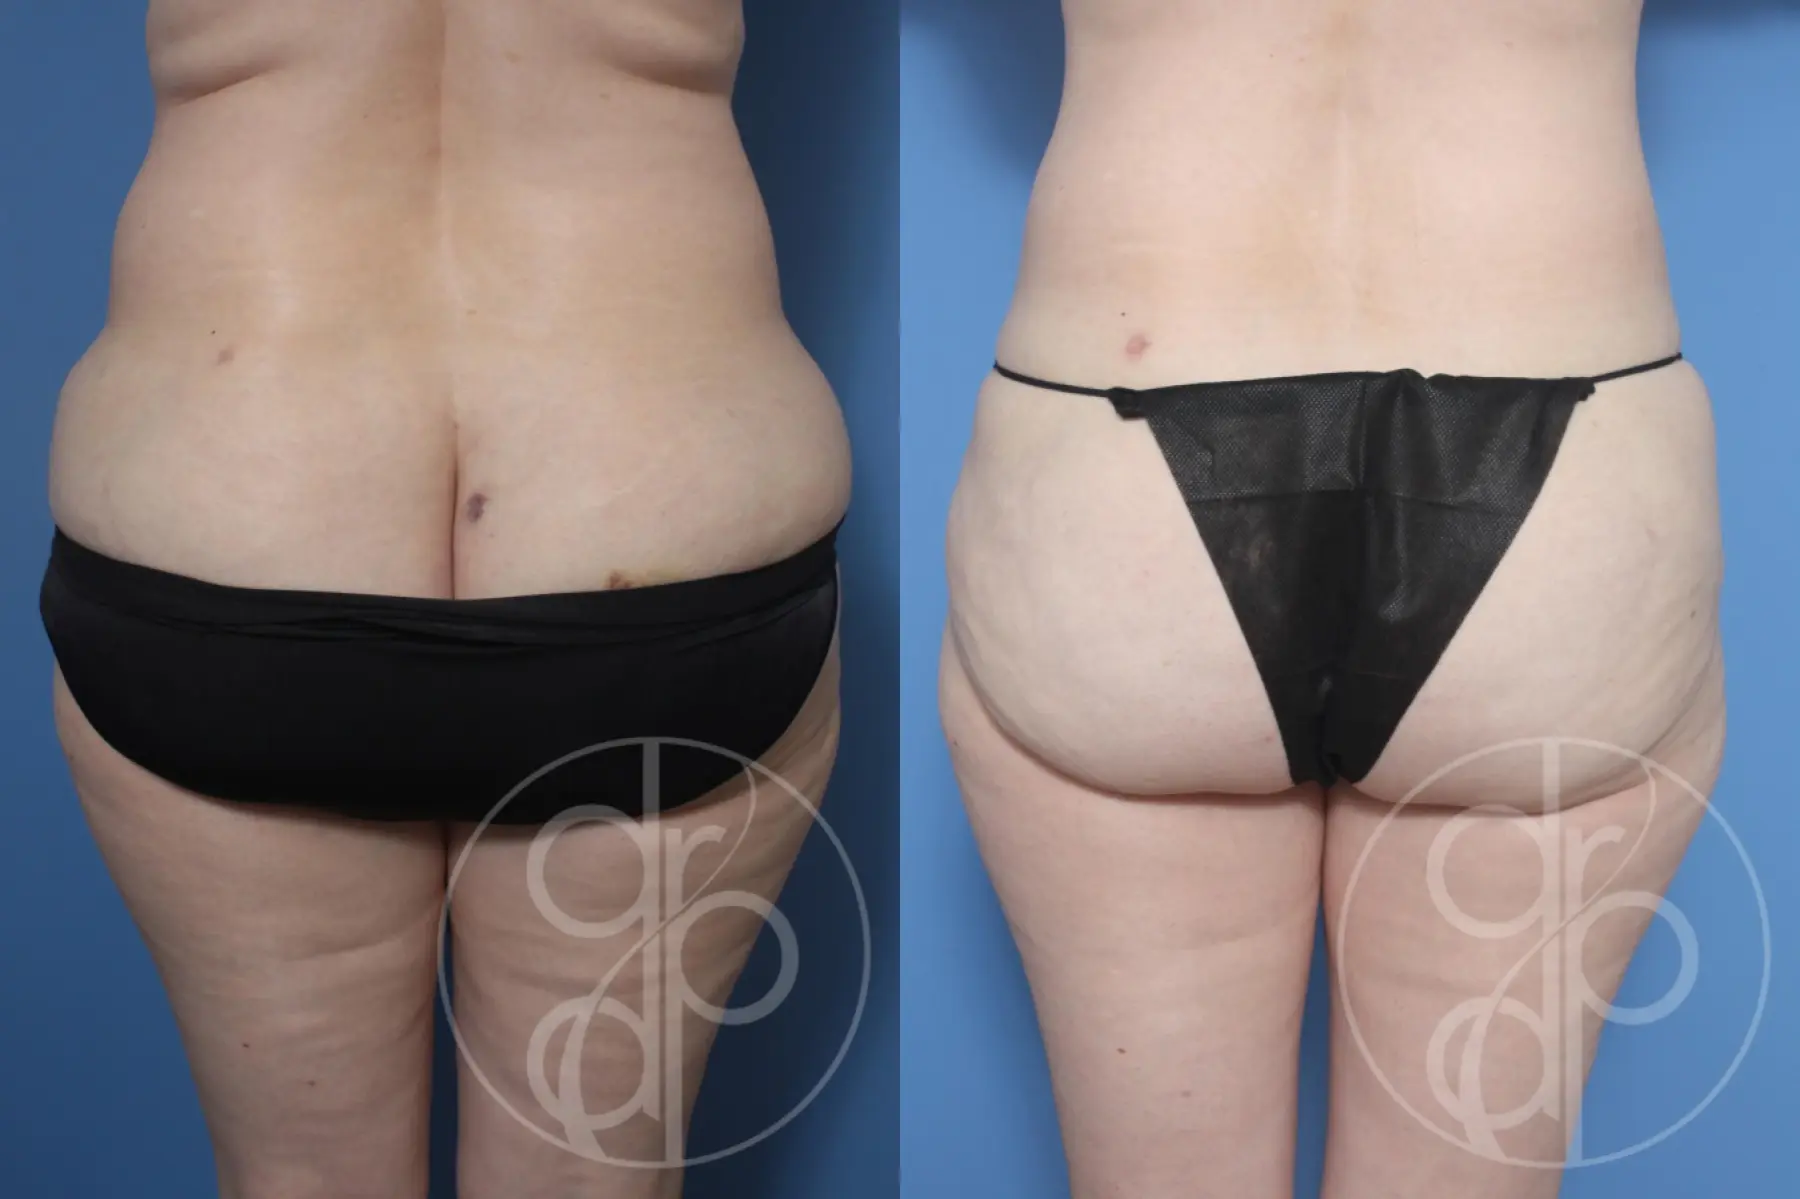 patient 13080 liposuction before and after result - Before and After 2